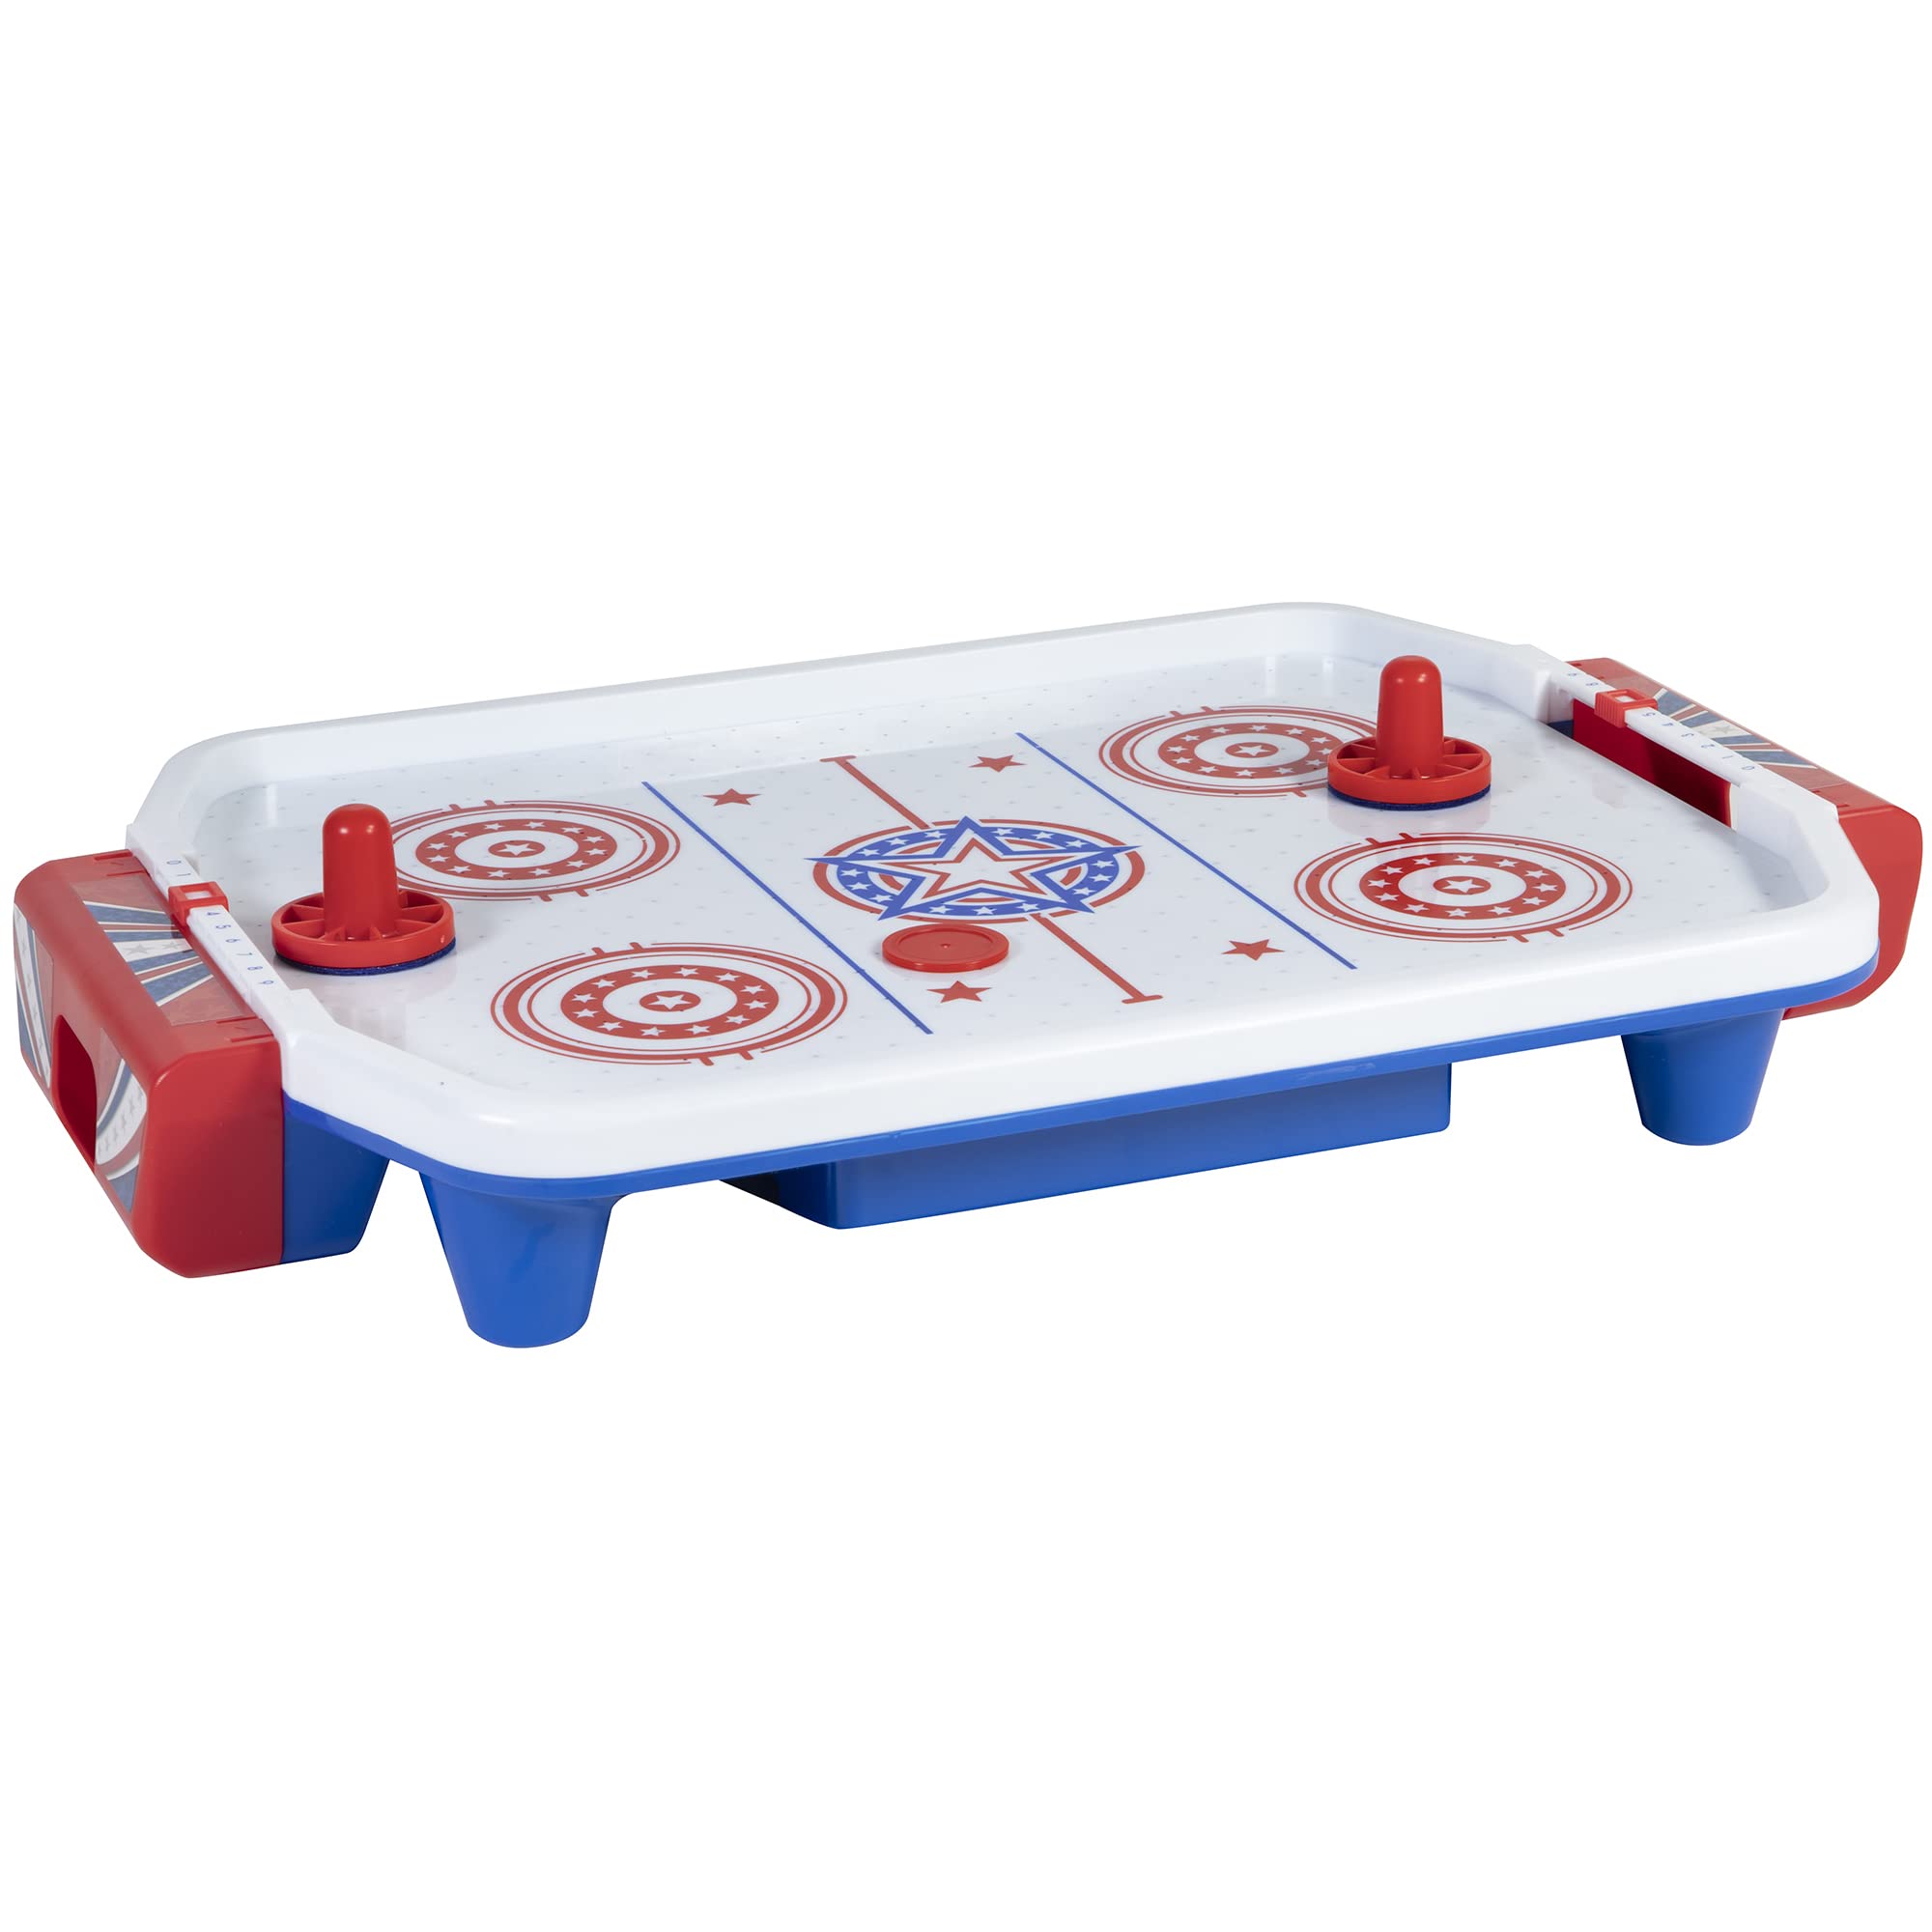 Retro Arcade Electronic: Air Hockey - Tabletop Game, Powerful Airflow, 2 Players, Ages 6+